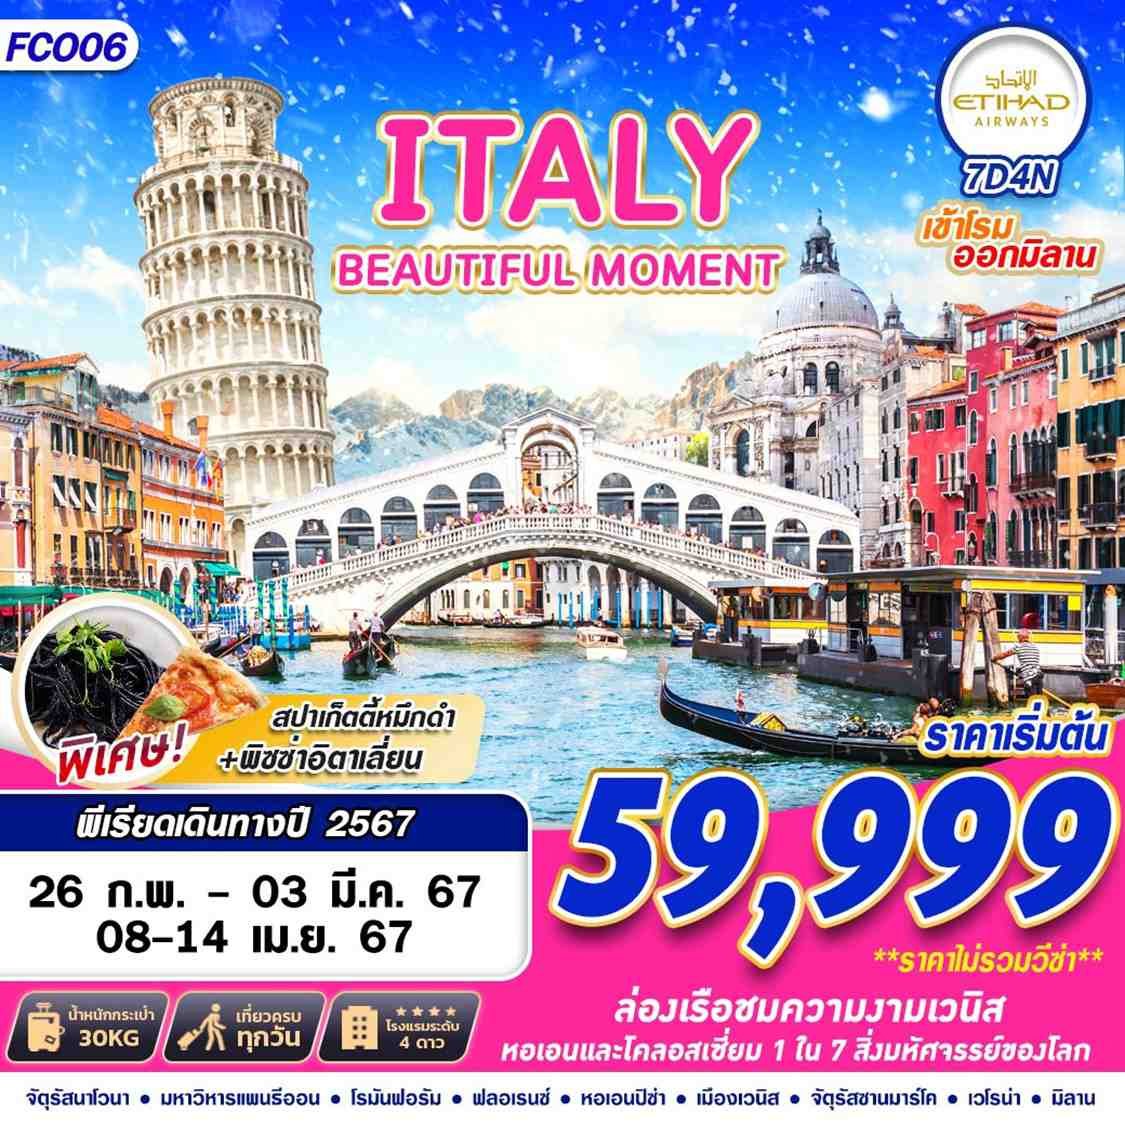 FCO06 ITALY BEAUTIFUL MOMENT 7D4N BY EY